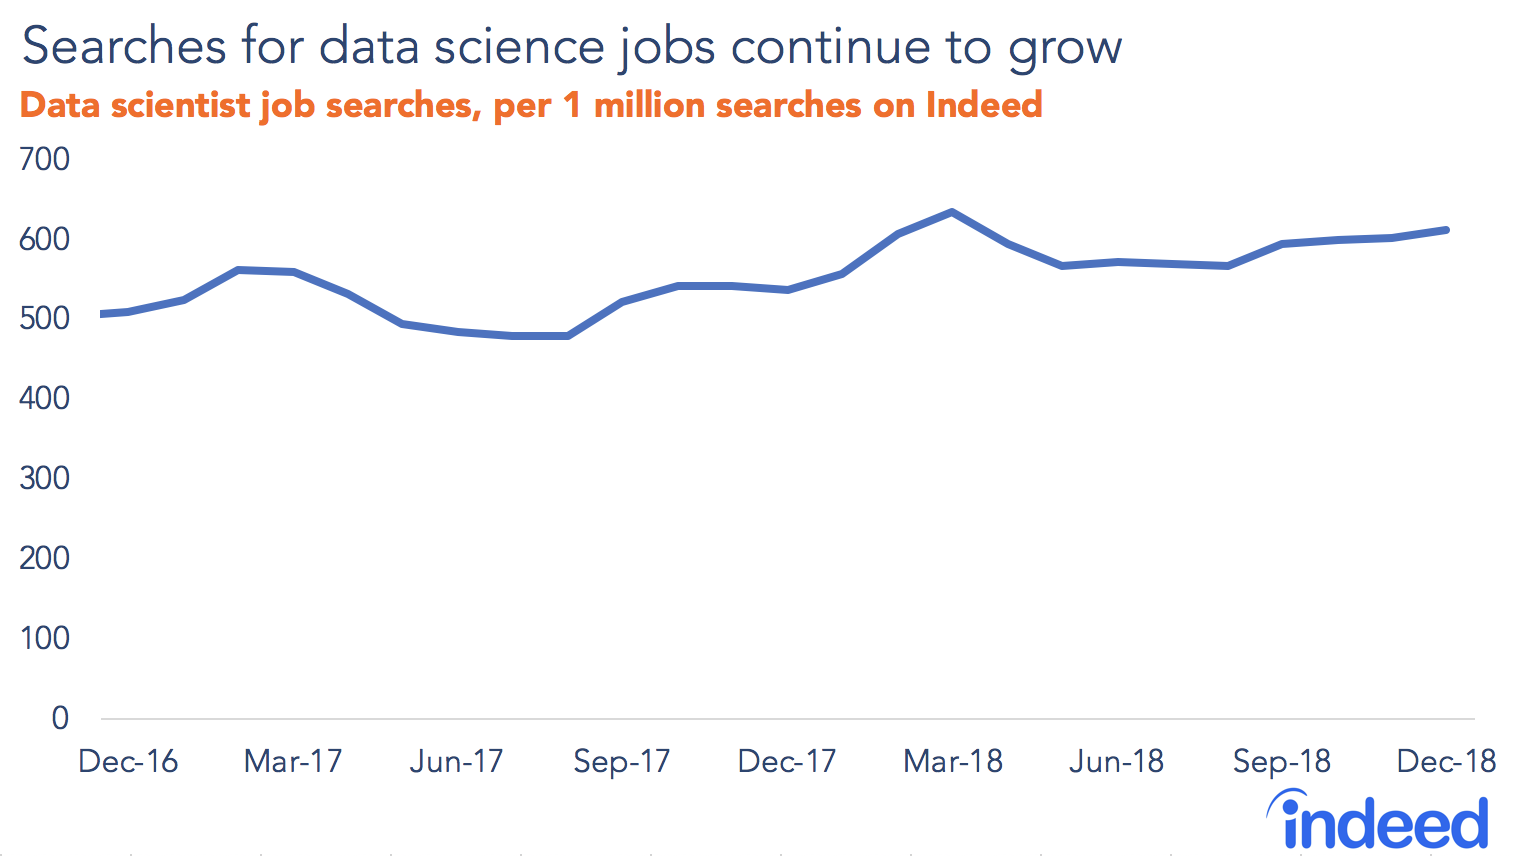 Searches for data science jobs continue to grow